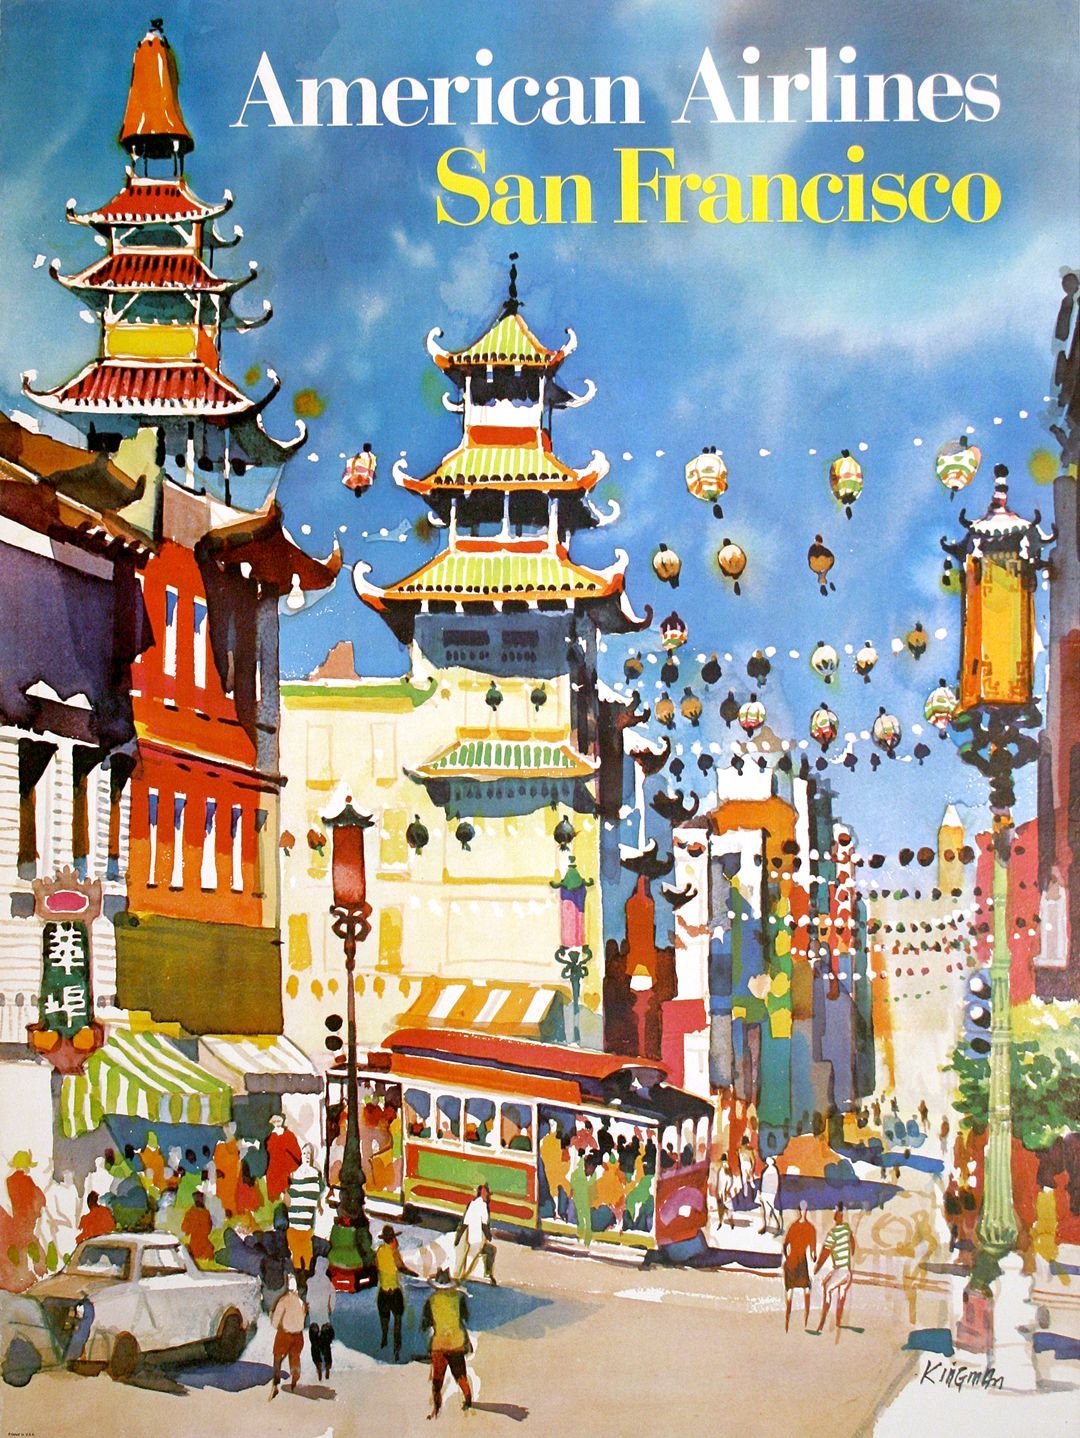 Original American Airlines Poster - San Francsico by Dong Kingman c1960